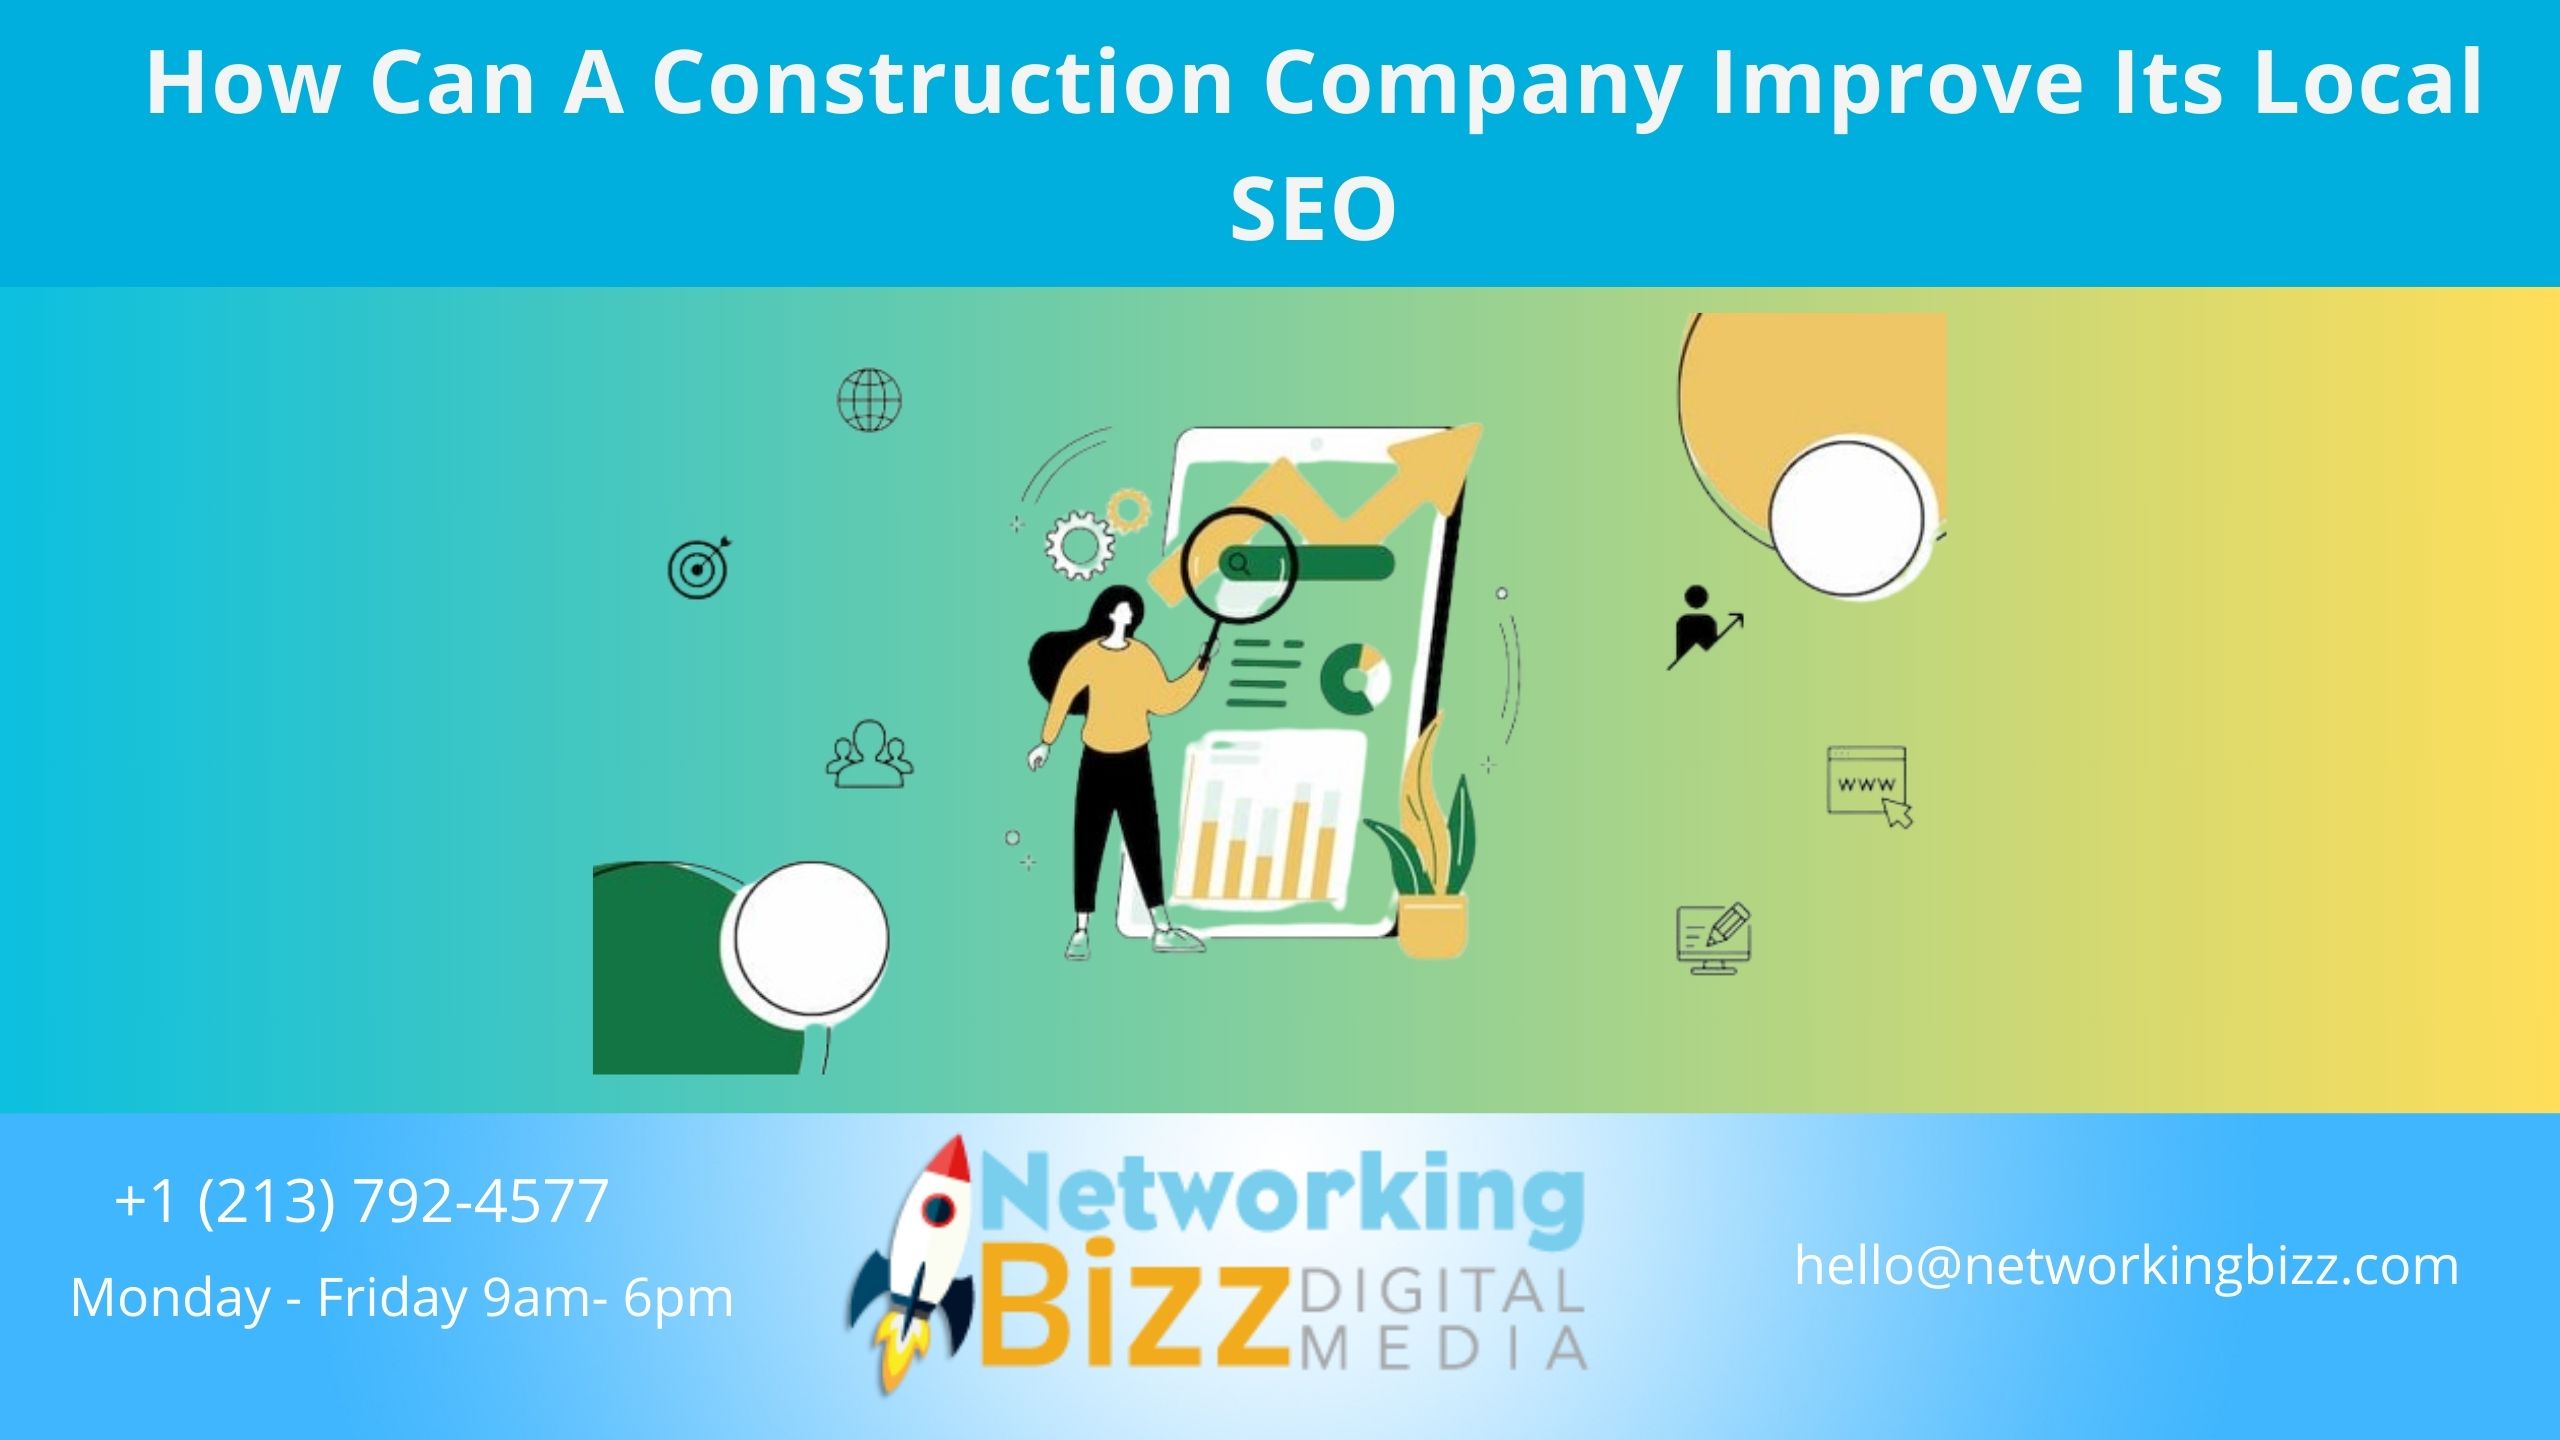 How Can A Construction Company Improve Its Local SEO